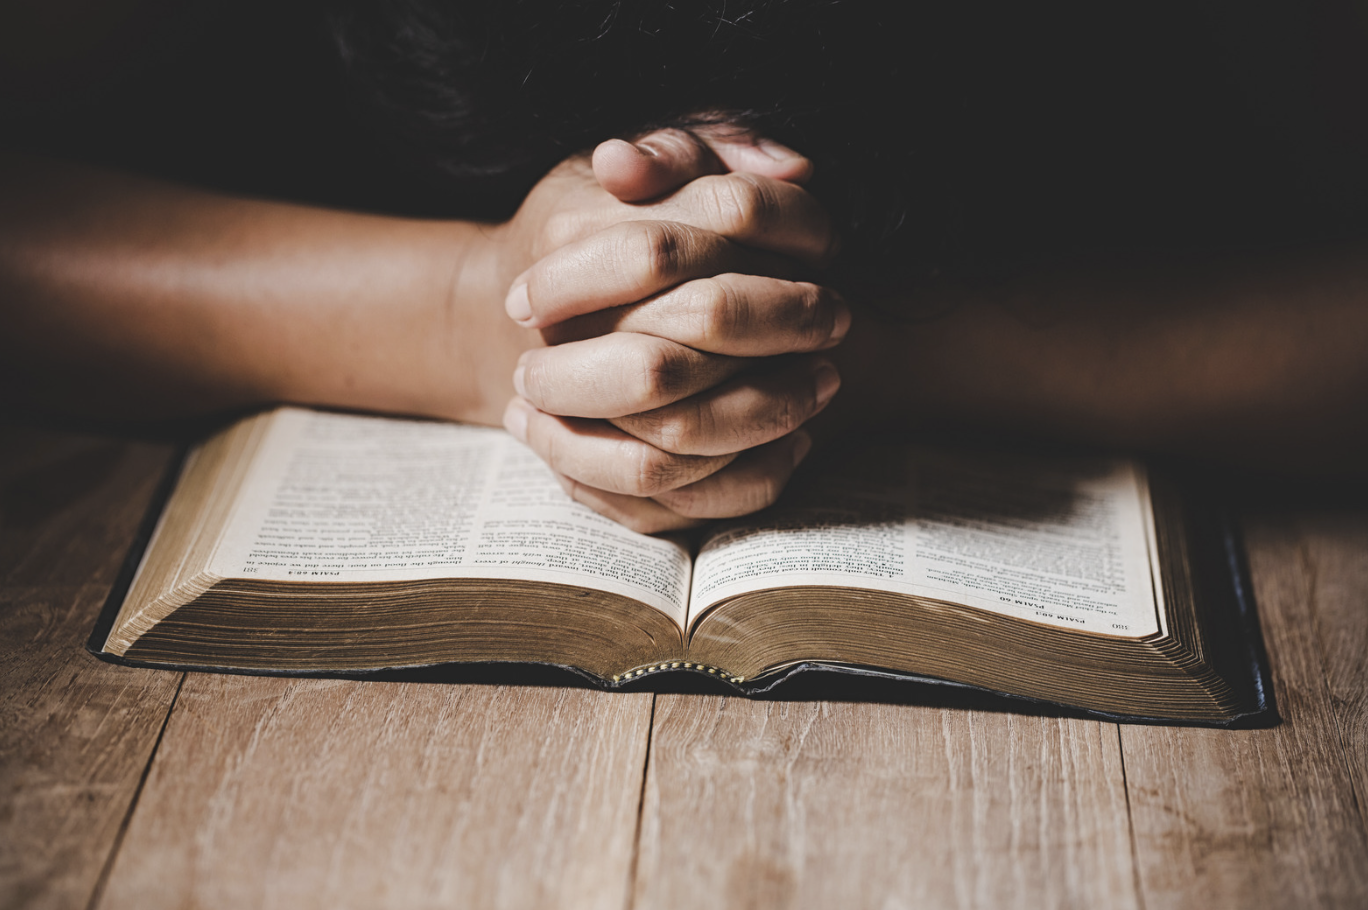 A man is praying with his hands on an open Bible.